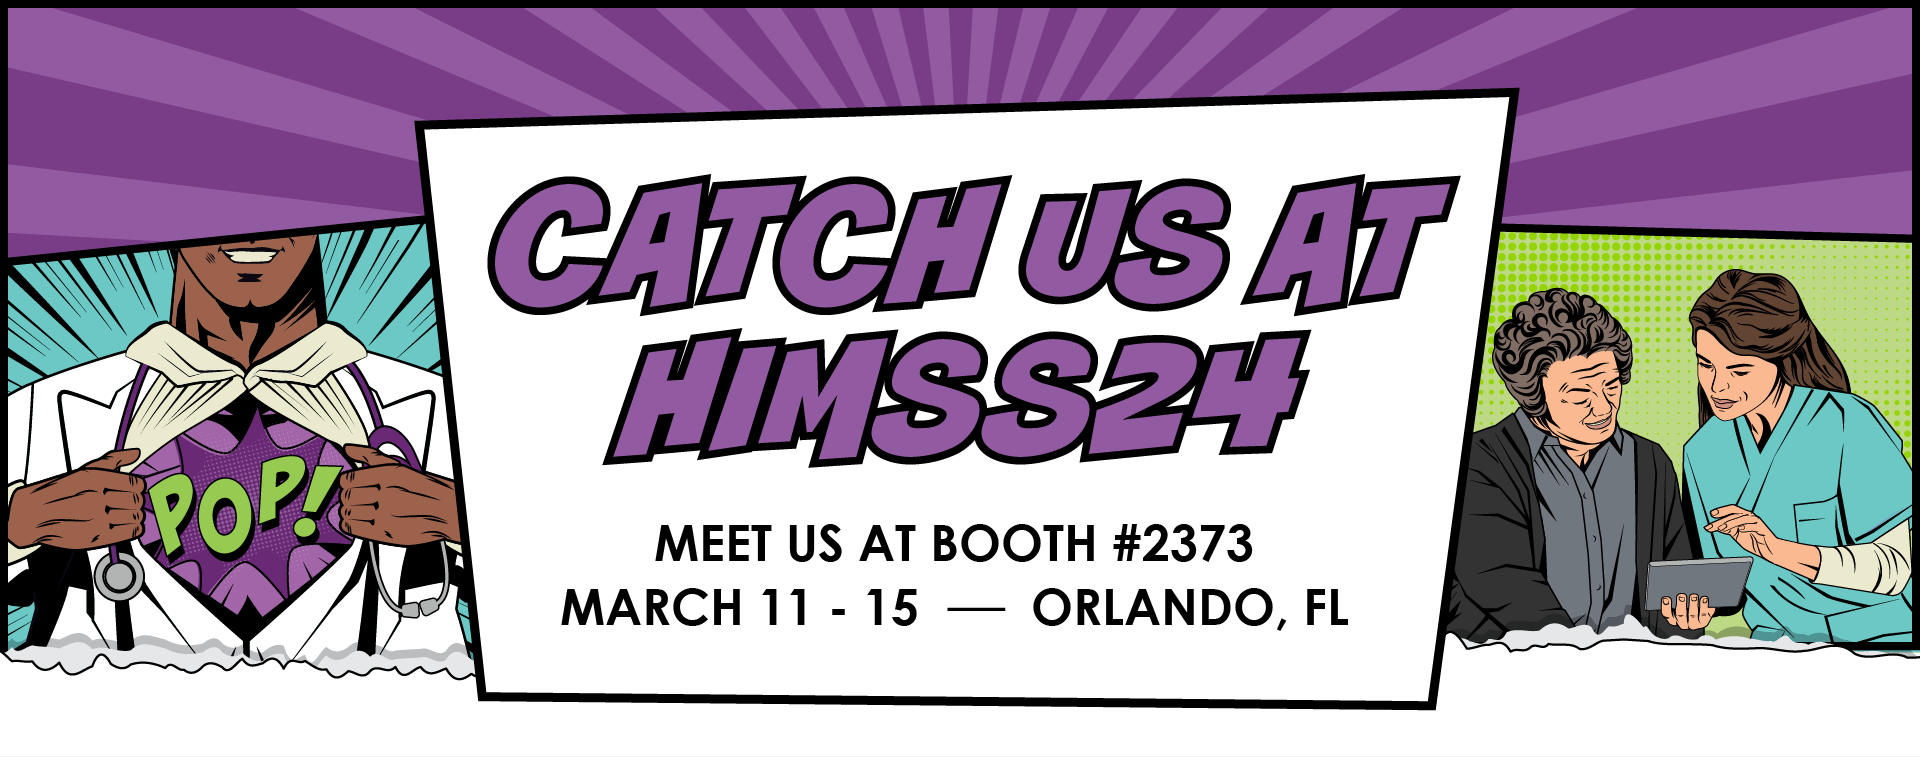 Catch us at HIMSS24